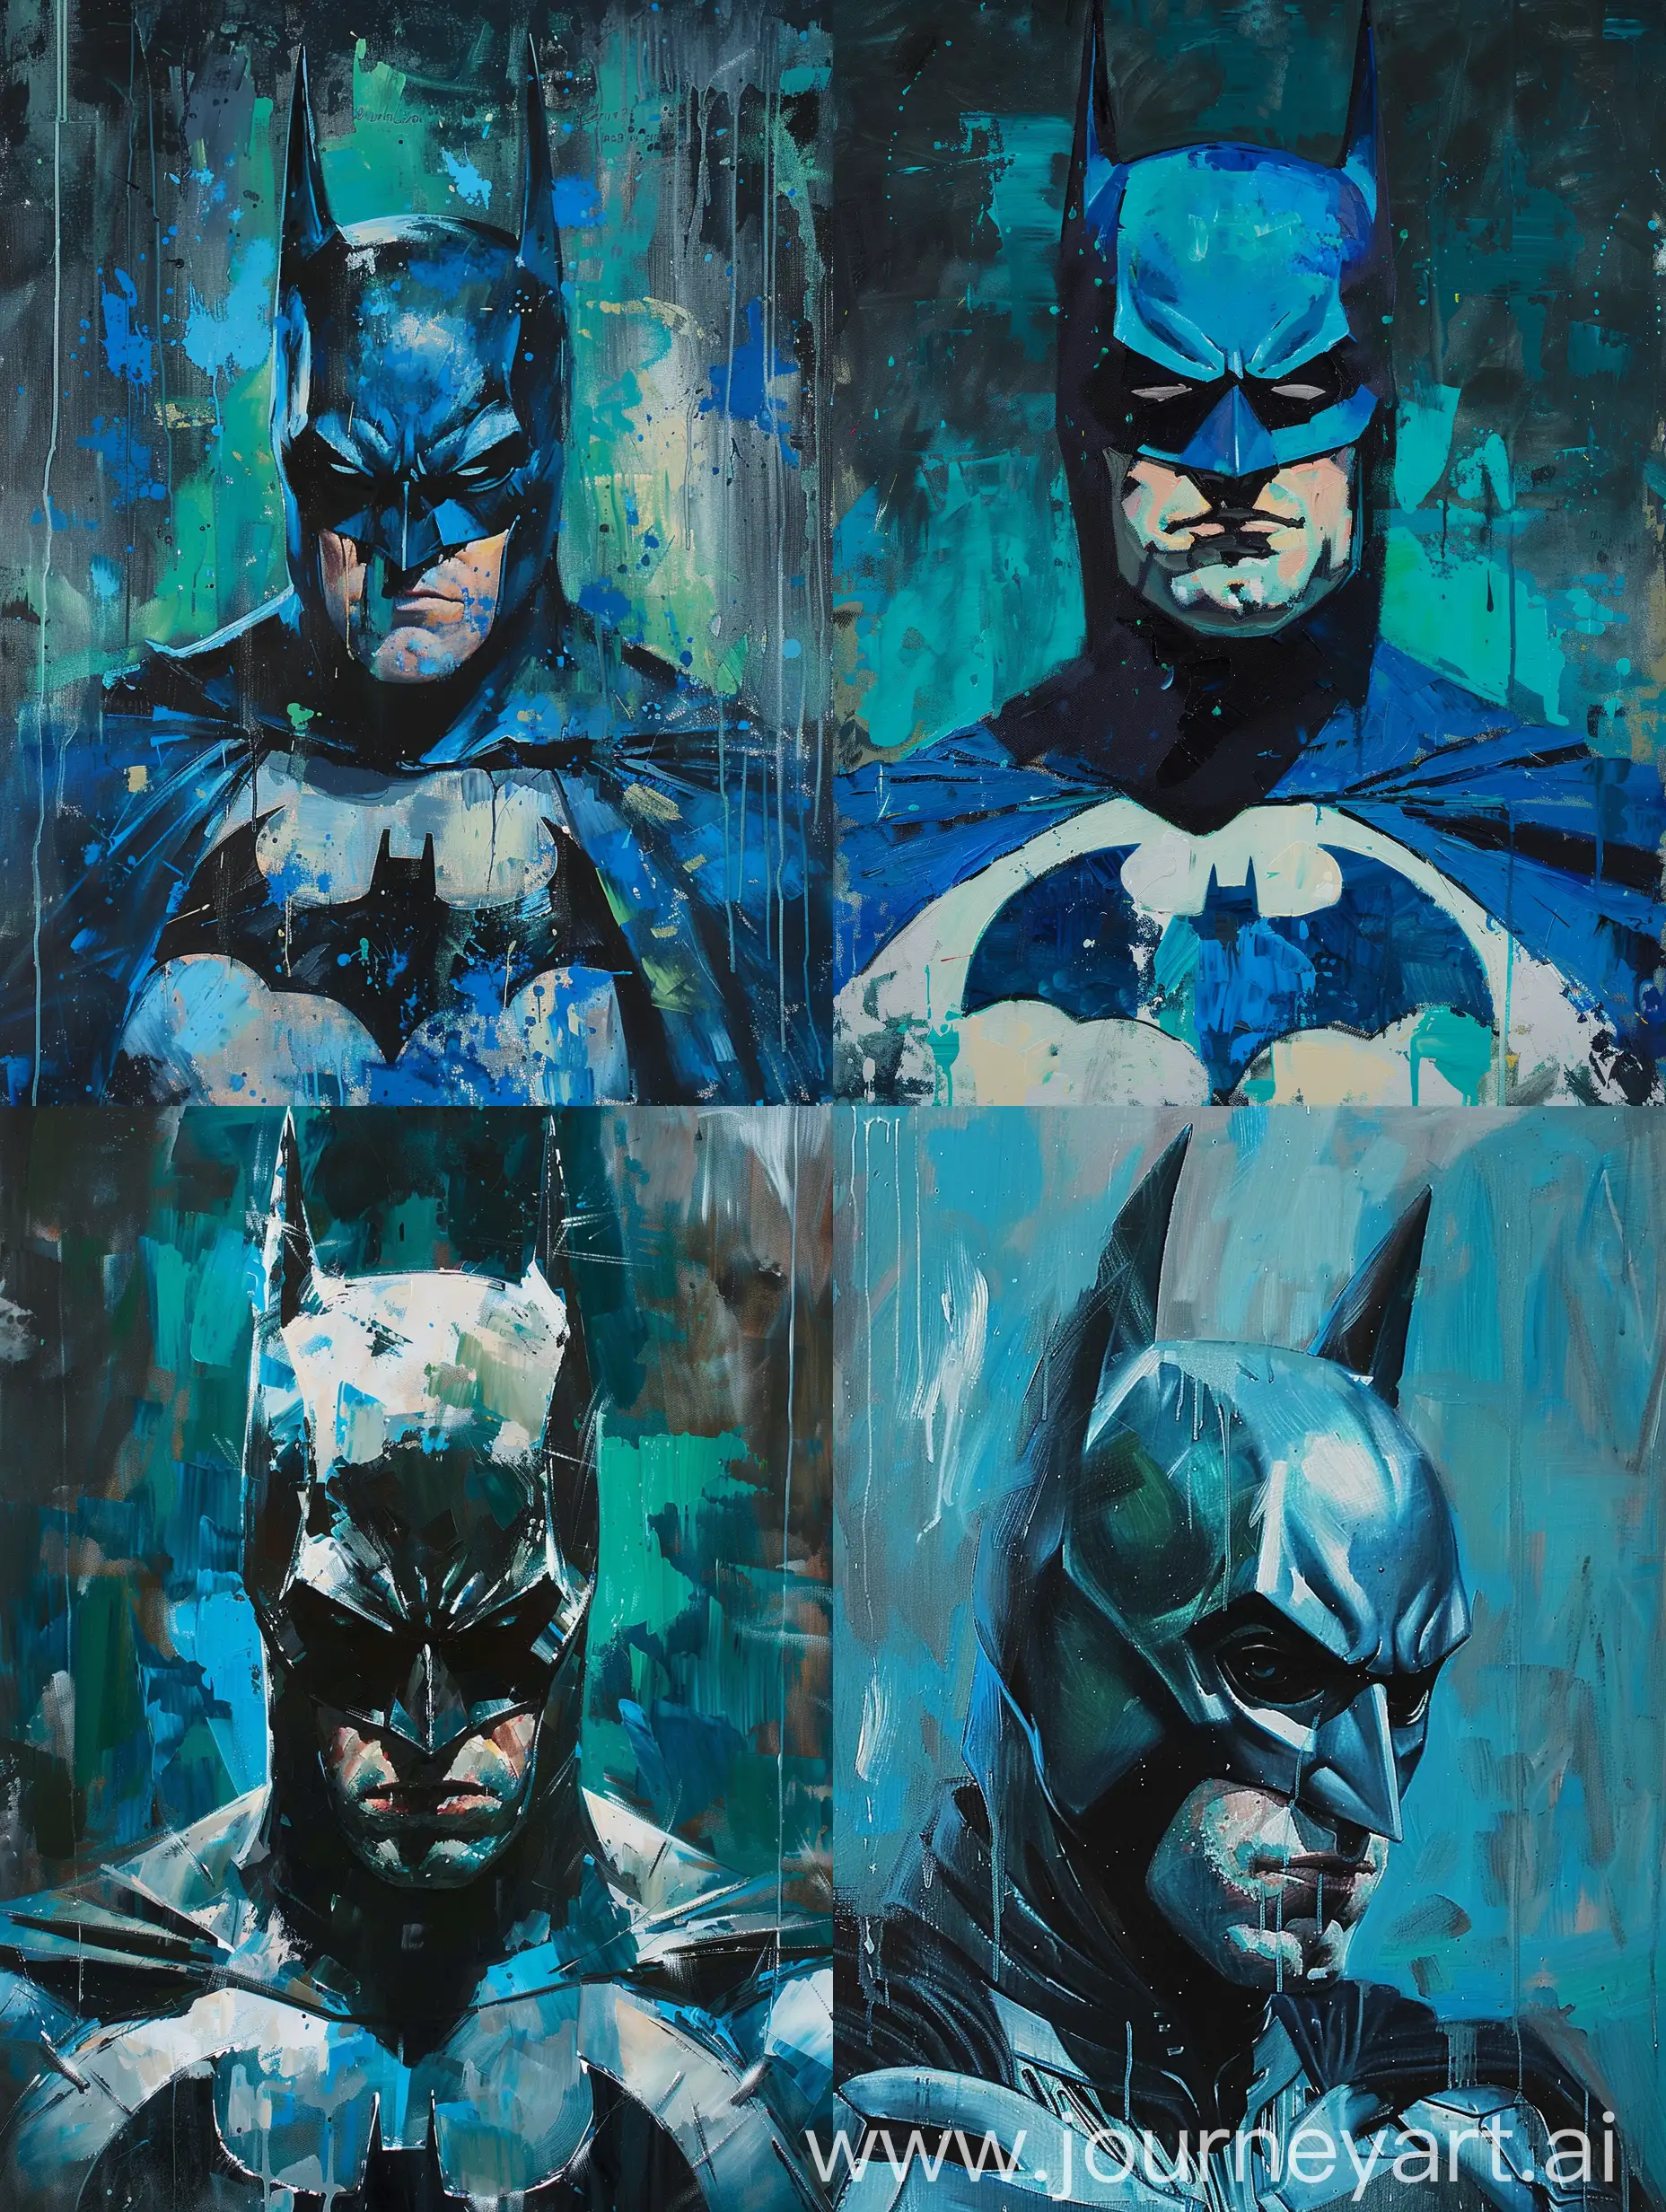 Batman-in-Star-Wars-Style-Oil-Painting-with-Bright-Blue-Palette